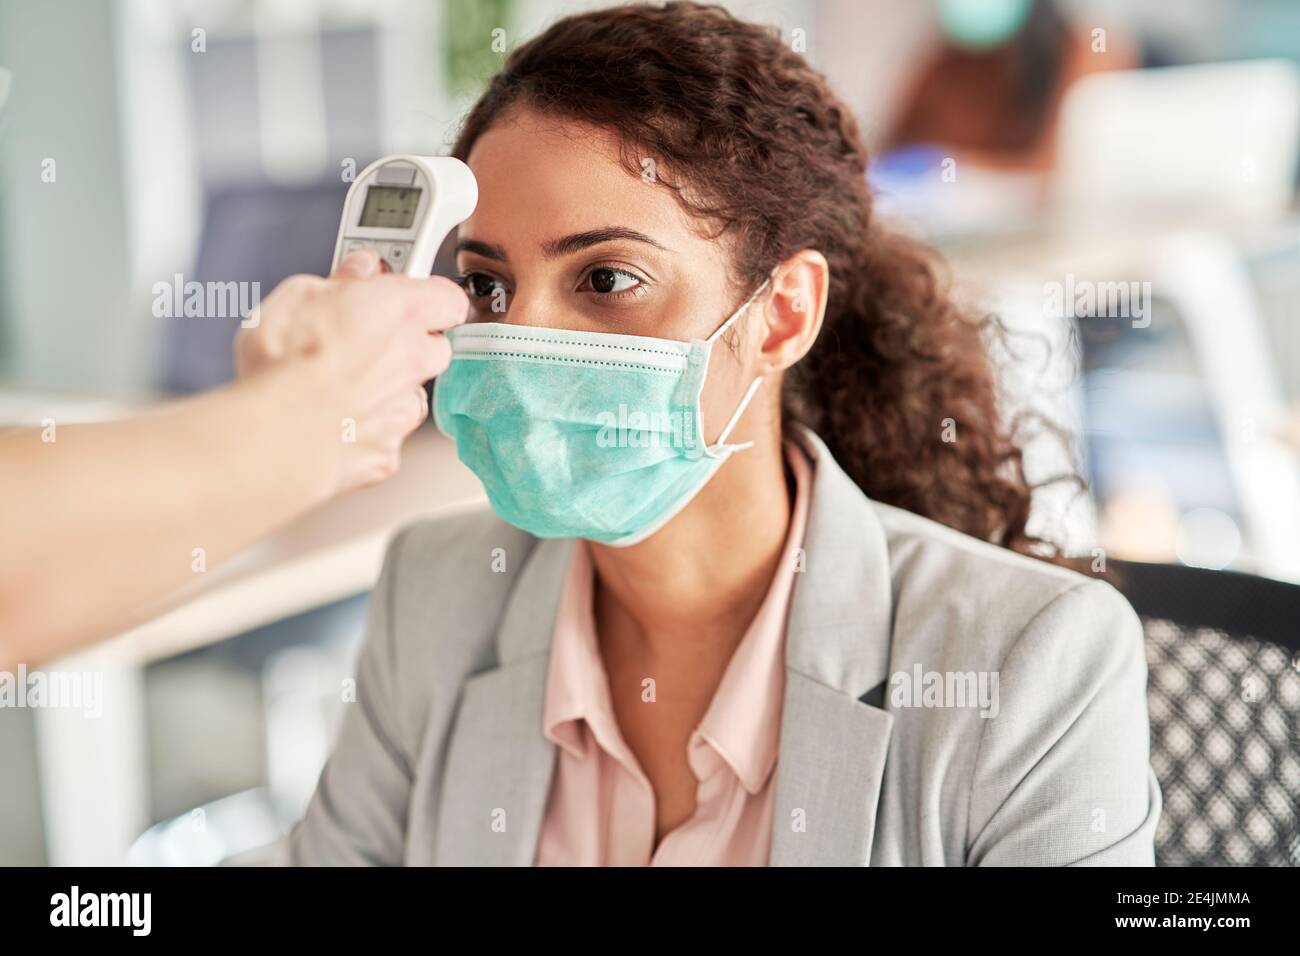 Female professional going through thermometer checkpoint at work place Stock Photo